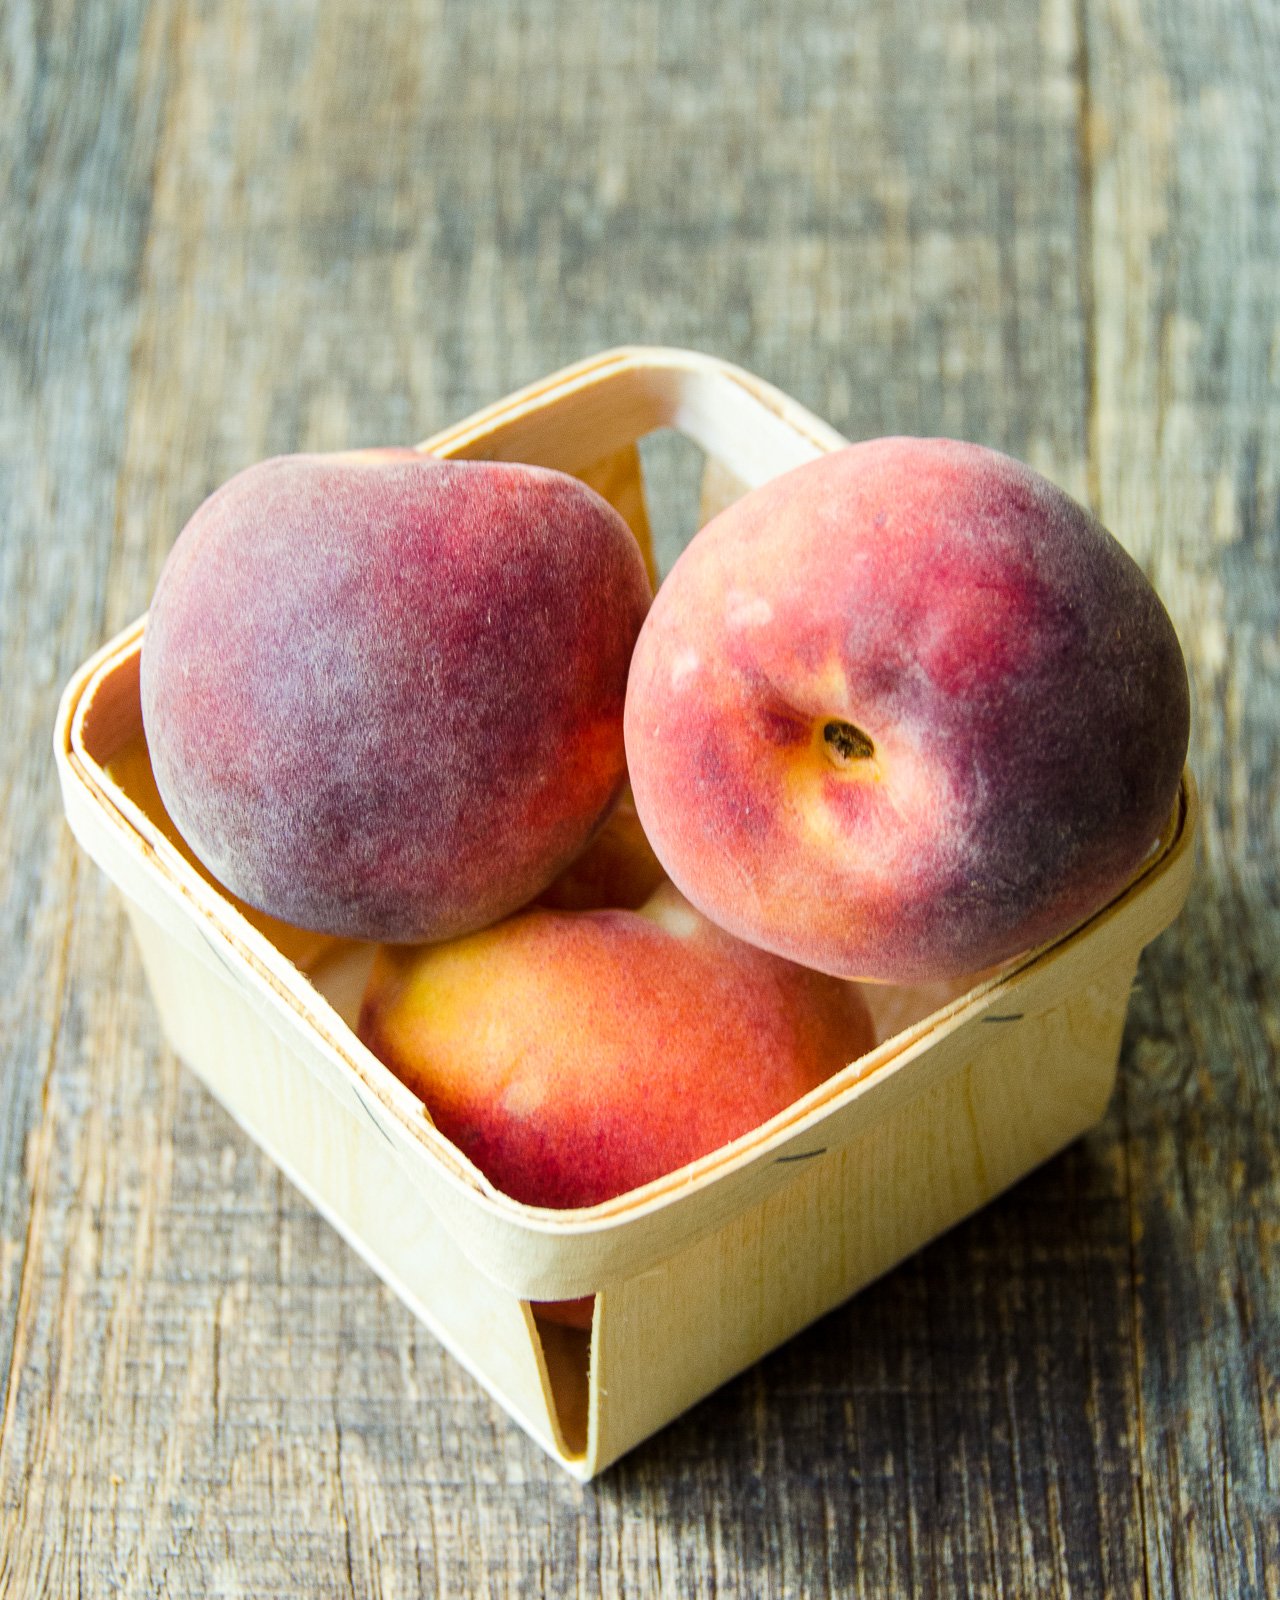 All About Peaches: The Differences Between White and Yellow Peaches,  Clingstone and Freestone Peaches